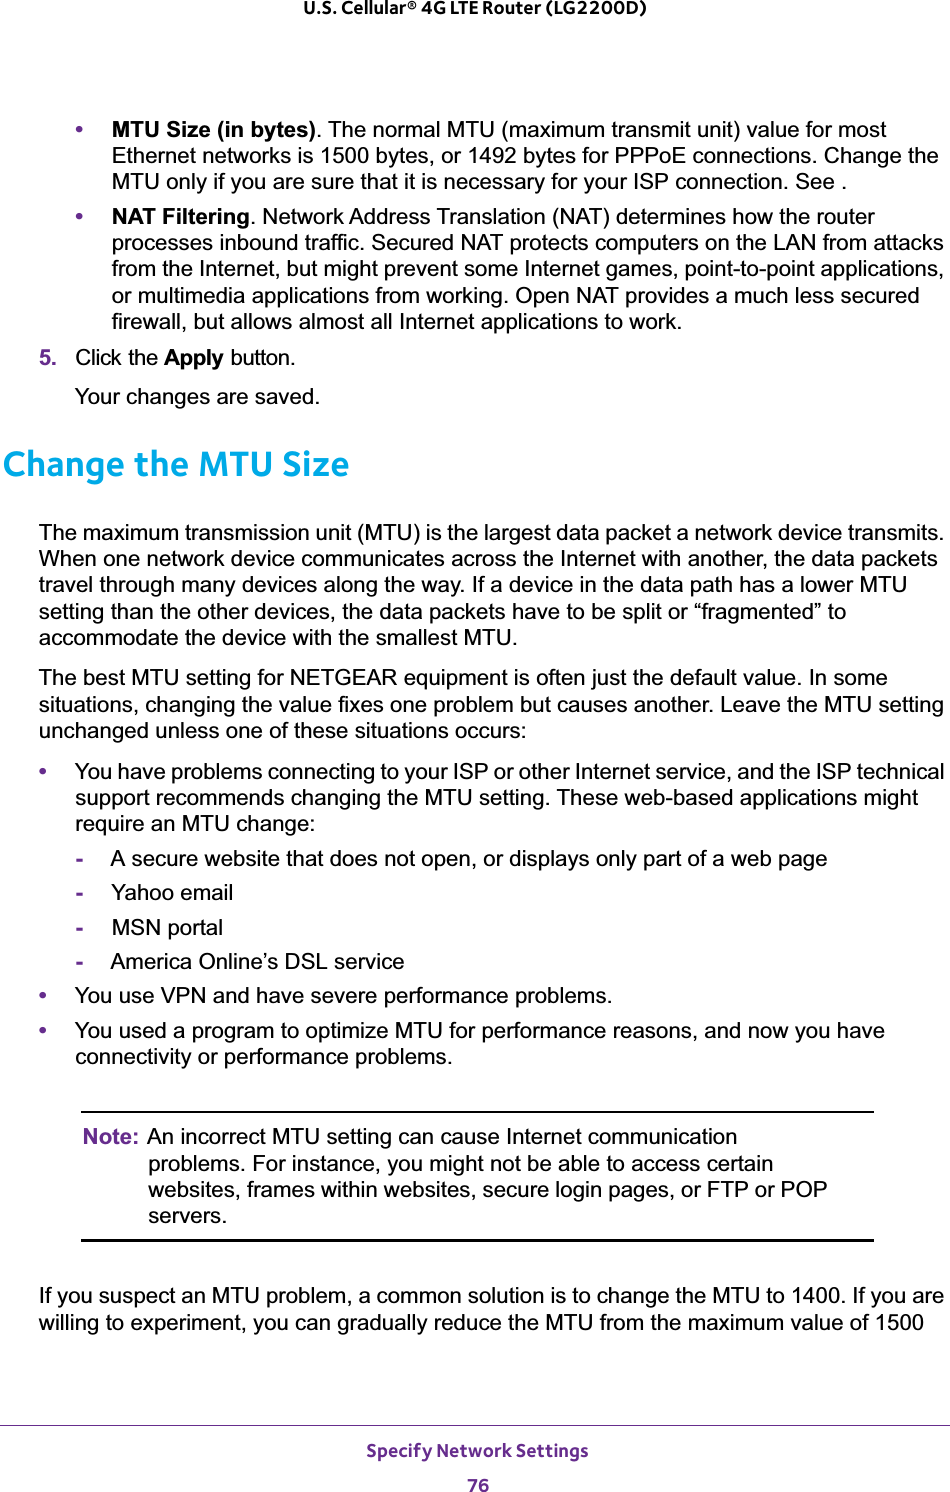 Specify Network Settings76U.S. Cellular® 4G LTE Router (LG2200D) •MTU Size (in bytes). The normal MTU (maximum transmit unit) value for most Ethernet networks is 1500 bytes, or 1492 bytes for PPPoE connections. Change the MTU only if you are sure that it is necessary for your ISP connection. See .•NAT Filtering. Network Address Translation (NAT) determines how the router processes inbound traffic. Secured NAT protects computers on the LAN from attacks from the Internet, but might prevent some Internet games, point-to-point applications, or multimedia applications from working. Open NAT provides a much less secured firewall, but allows almost all Internet applications to work. 5. Click the Apply button.Your changes are saved.Change the MTU SizeThe maximum transmission unit (MTU) is the largest data packet a network device transmits. When one network device communicates across the Internet with another, the data packets travel through many devices along the way. If a device in the data path has a lower MTU setting than the other devices, the data packets have to be split or “fragmented” to accommodate the device with the smallest MTU. The best MTU setting for NETGEAR equipment is often just the default value. In some situations, changing the value fixes one problem but causes another. Leave the MTU setting unchanged unless one of these situations occurs:•You have problems connecting to your ISP or other Internet service, and the ISP technical support recommends changing the MTU setting. These web-based applications might require an MTU change:-A secure website that does not open, or displays only part of a web page-Yahoo email-MSN portal-America Online’s DSL service•You use VPN and have severe performance problems.•You used a program to optimize MTU for performance reasons, and now you have connectivity or performance problems.Note: An incorrect MTU setting can cause Internet communication problems. For instance, you might not be able to access certain websites, frames within websites, secure login pages, or FTP or POP servers.If you suspect an MTU problem, a common solution is to change the MTU to 1400. If you are willing to experiment, you can gradually reduce the MTU from the maximum value of 1500 